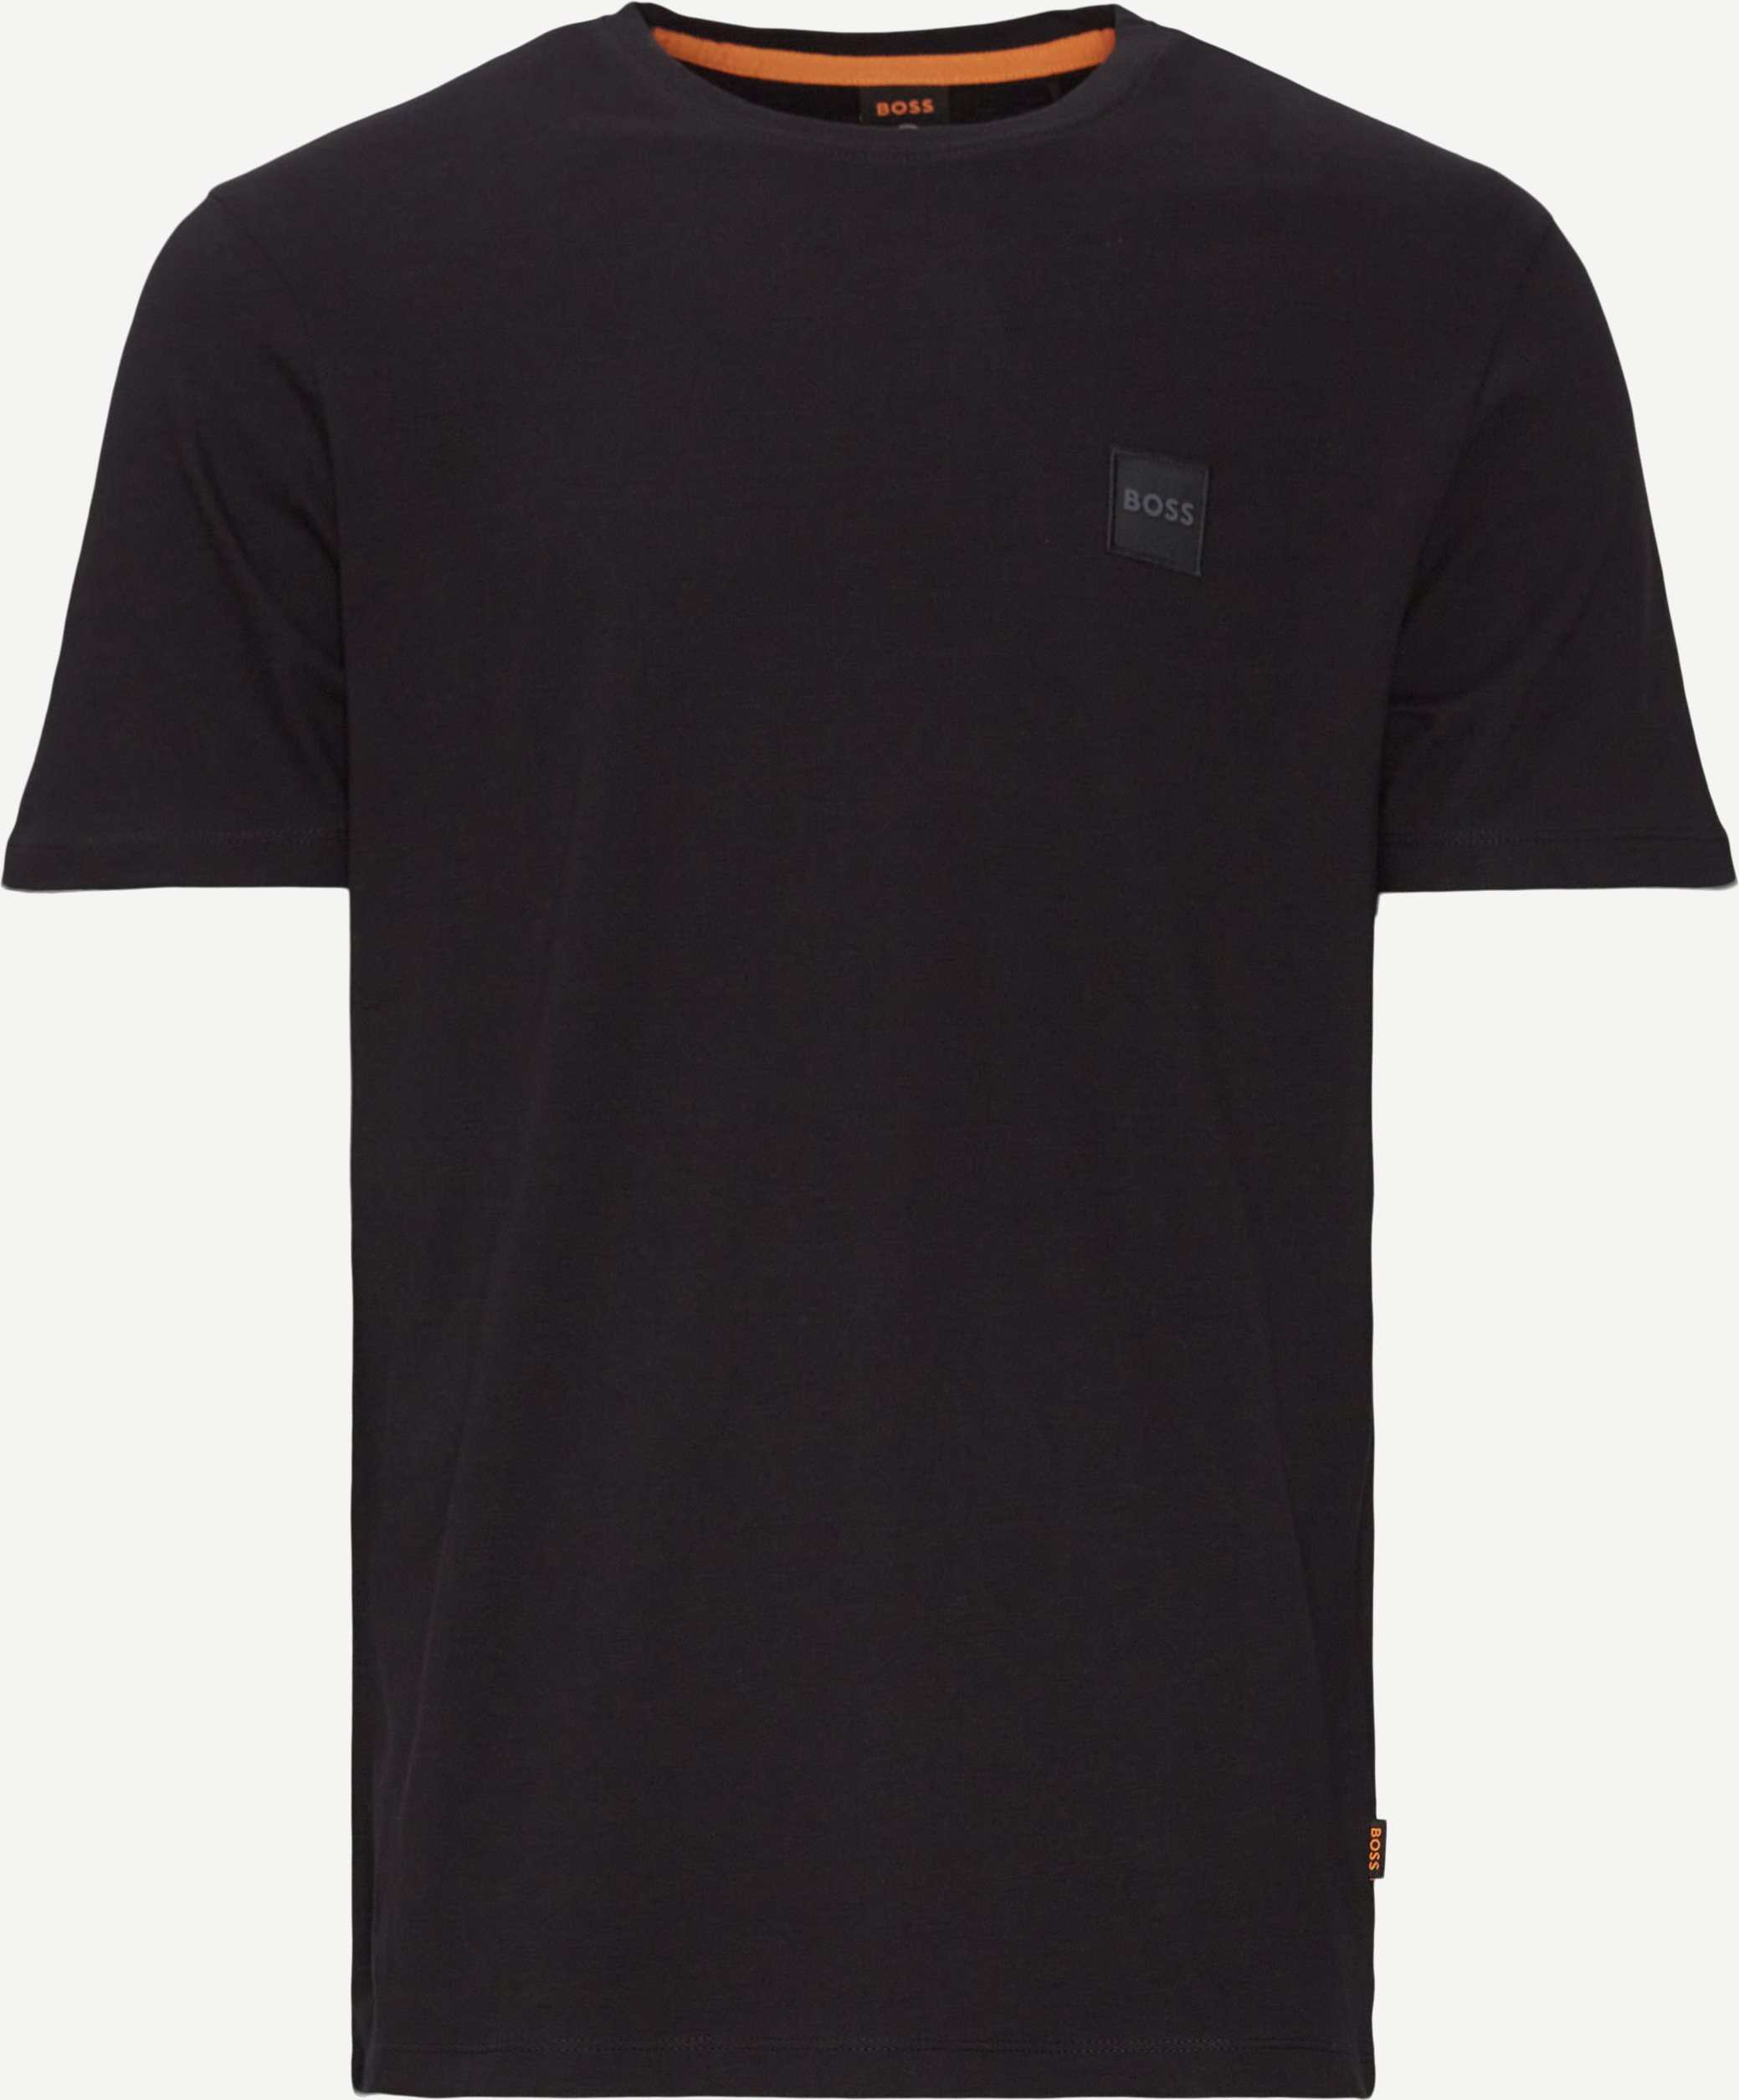 T-shirts - Relaxed fit - Black